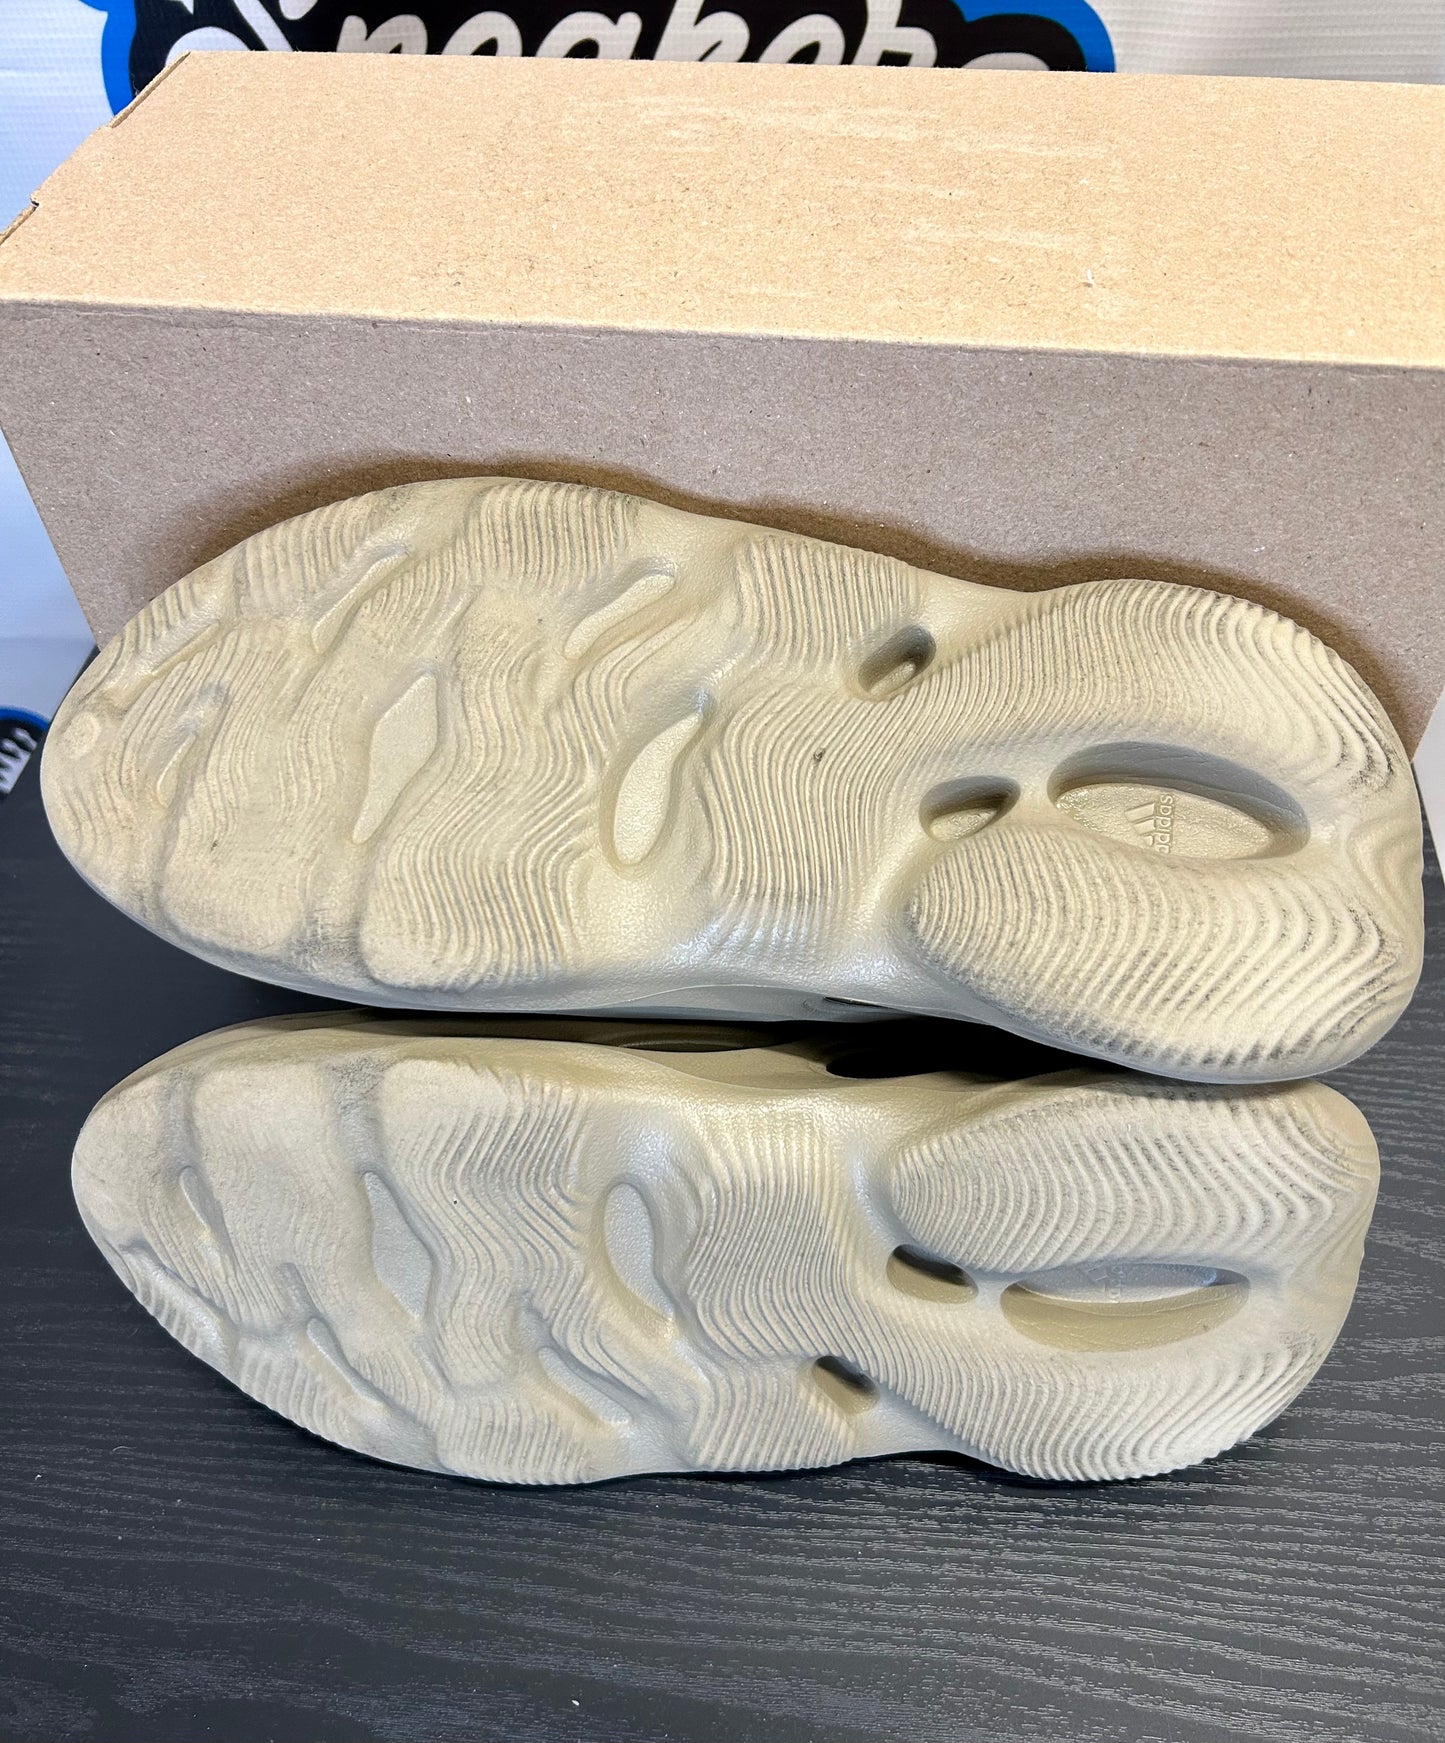 Yeezy Foam Runner Stone Taupe (Pre-Owned)